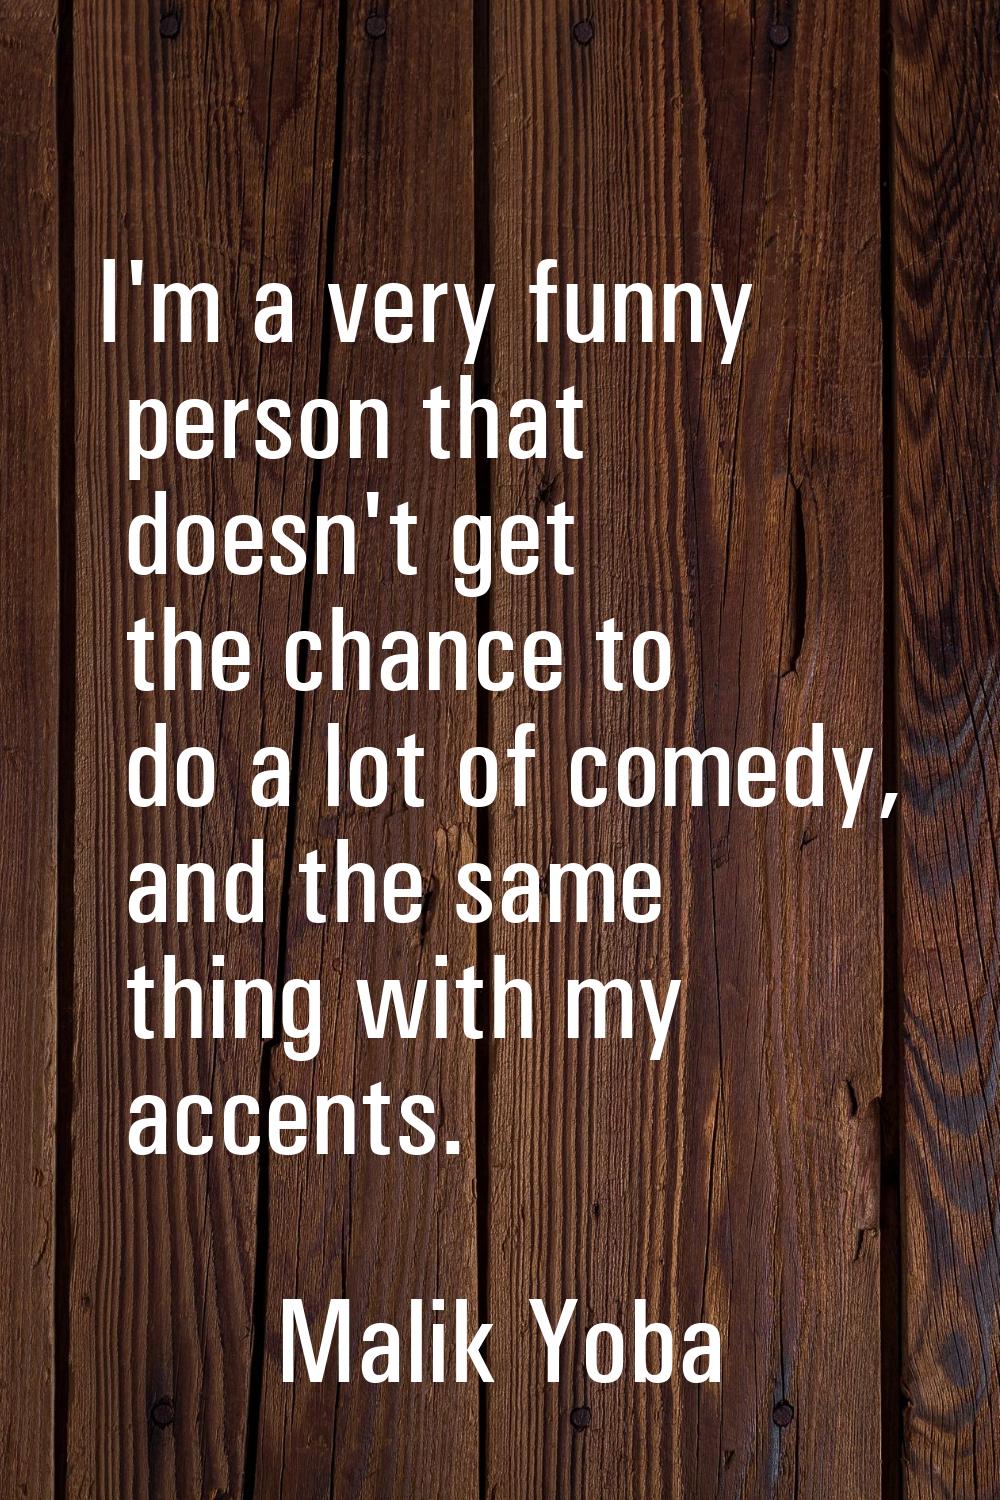 I'm a very funny person that doesn't get the chance to do a lot of comedy, and the same thing with 